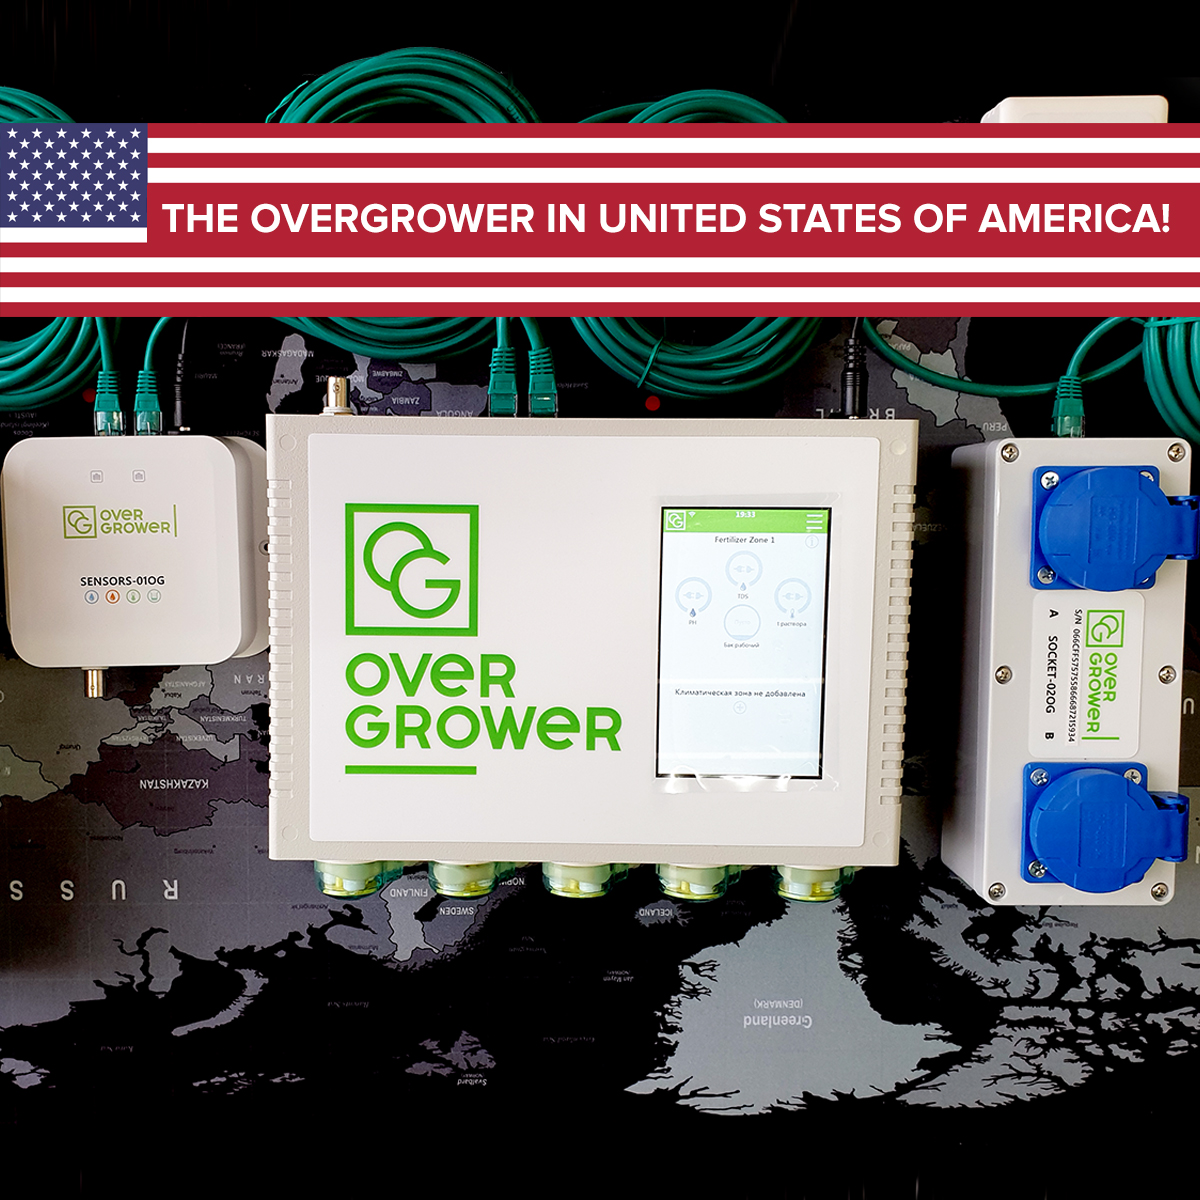 OverGrower the growing automation device arrived at a farm in the USA